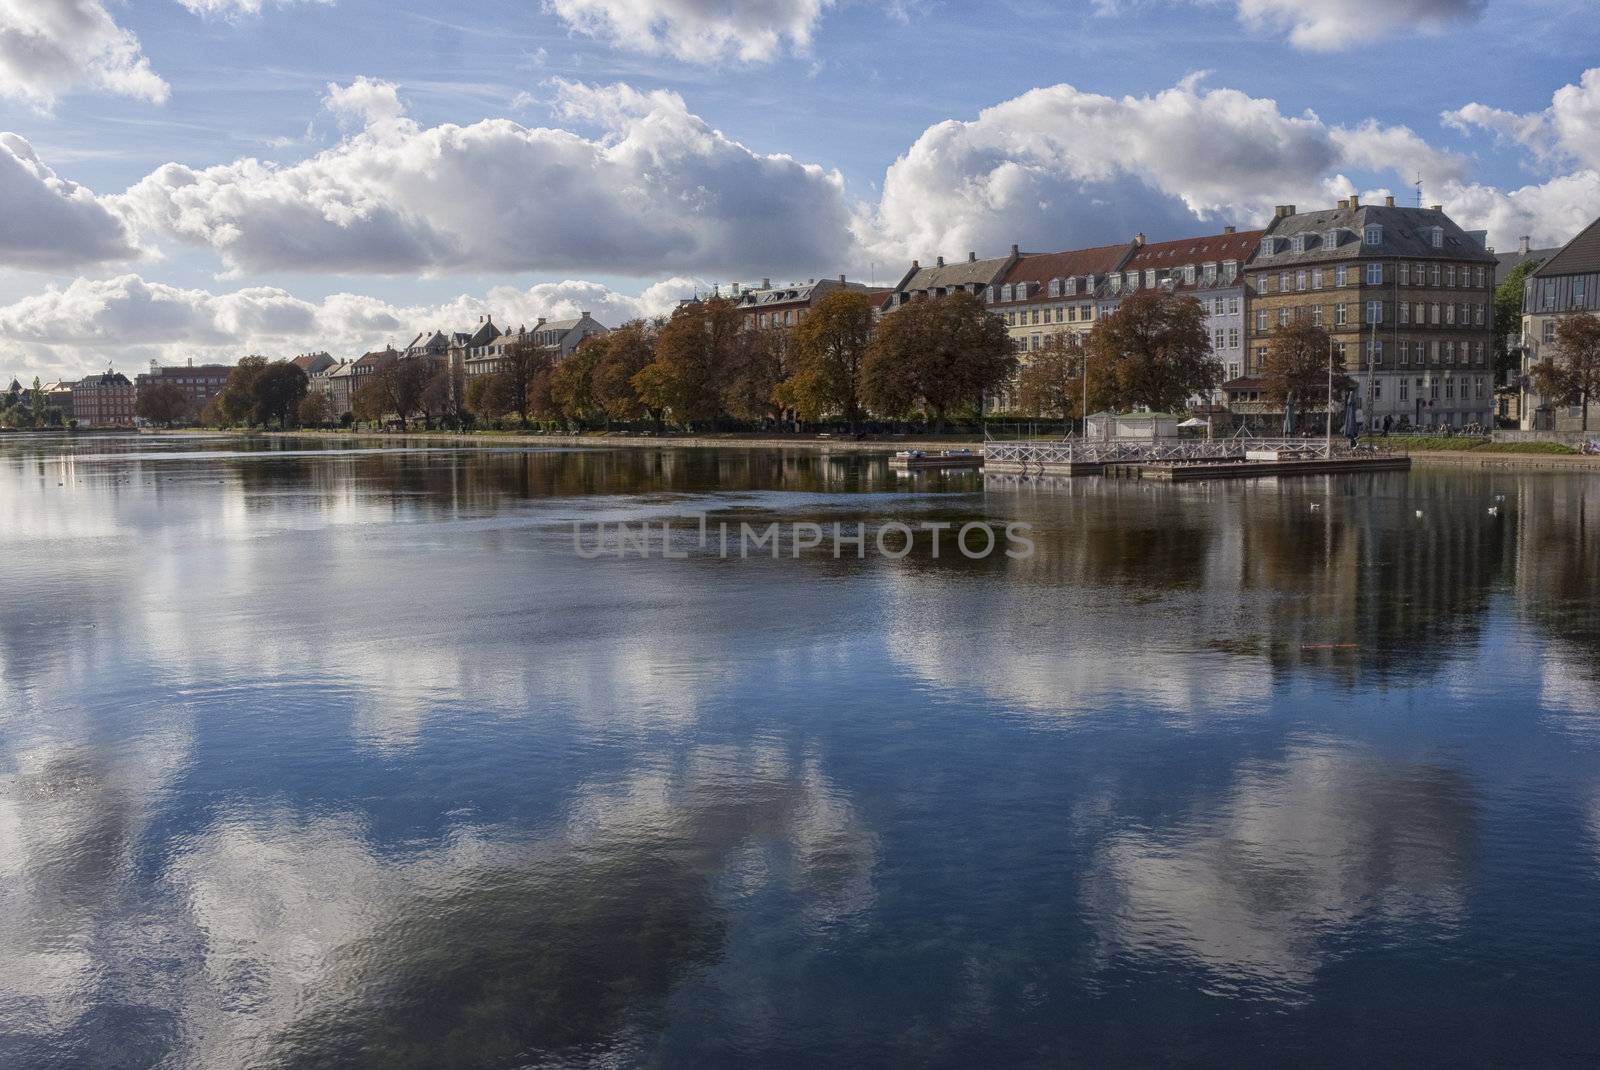 Copenhagen city by the urban lakes on a lovely October day.